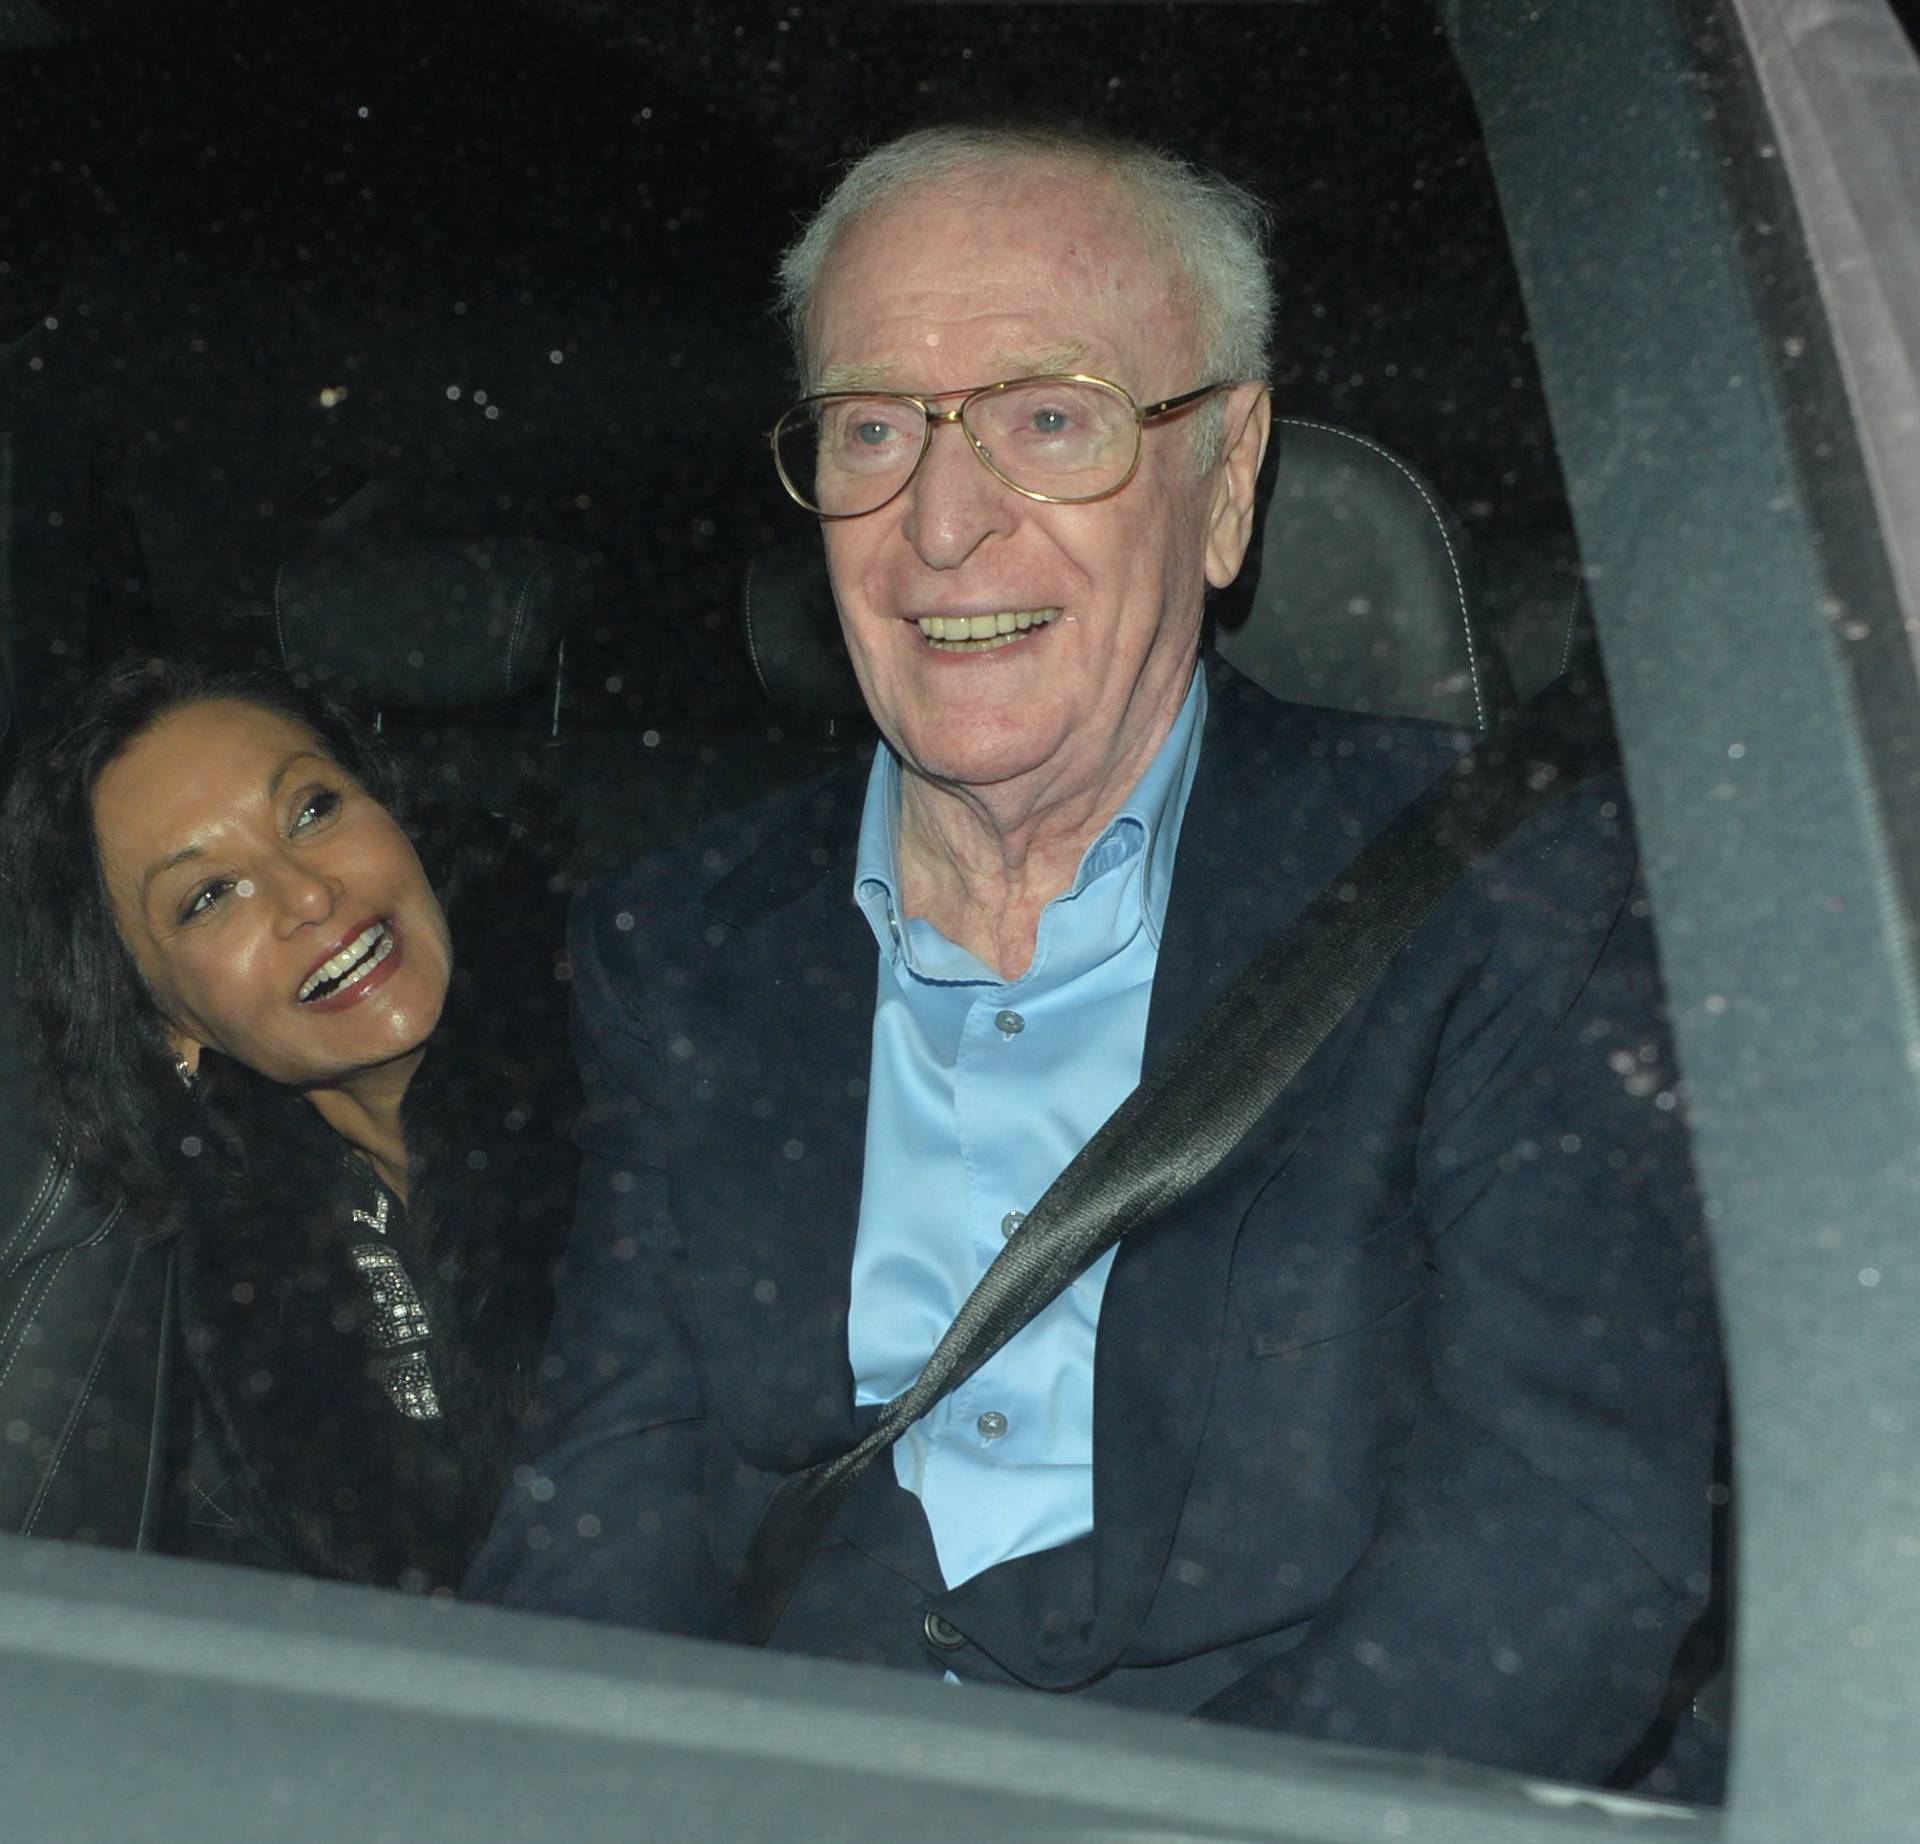 Michael Caine Using a Walker as he Leaves Drury Lane Theatre